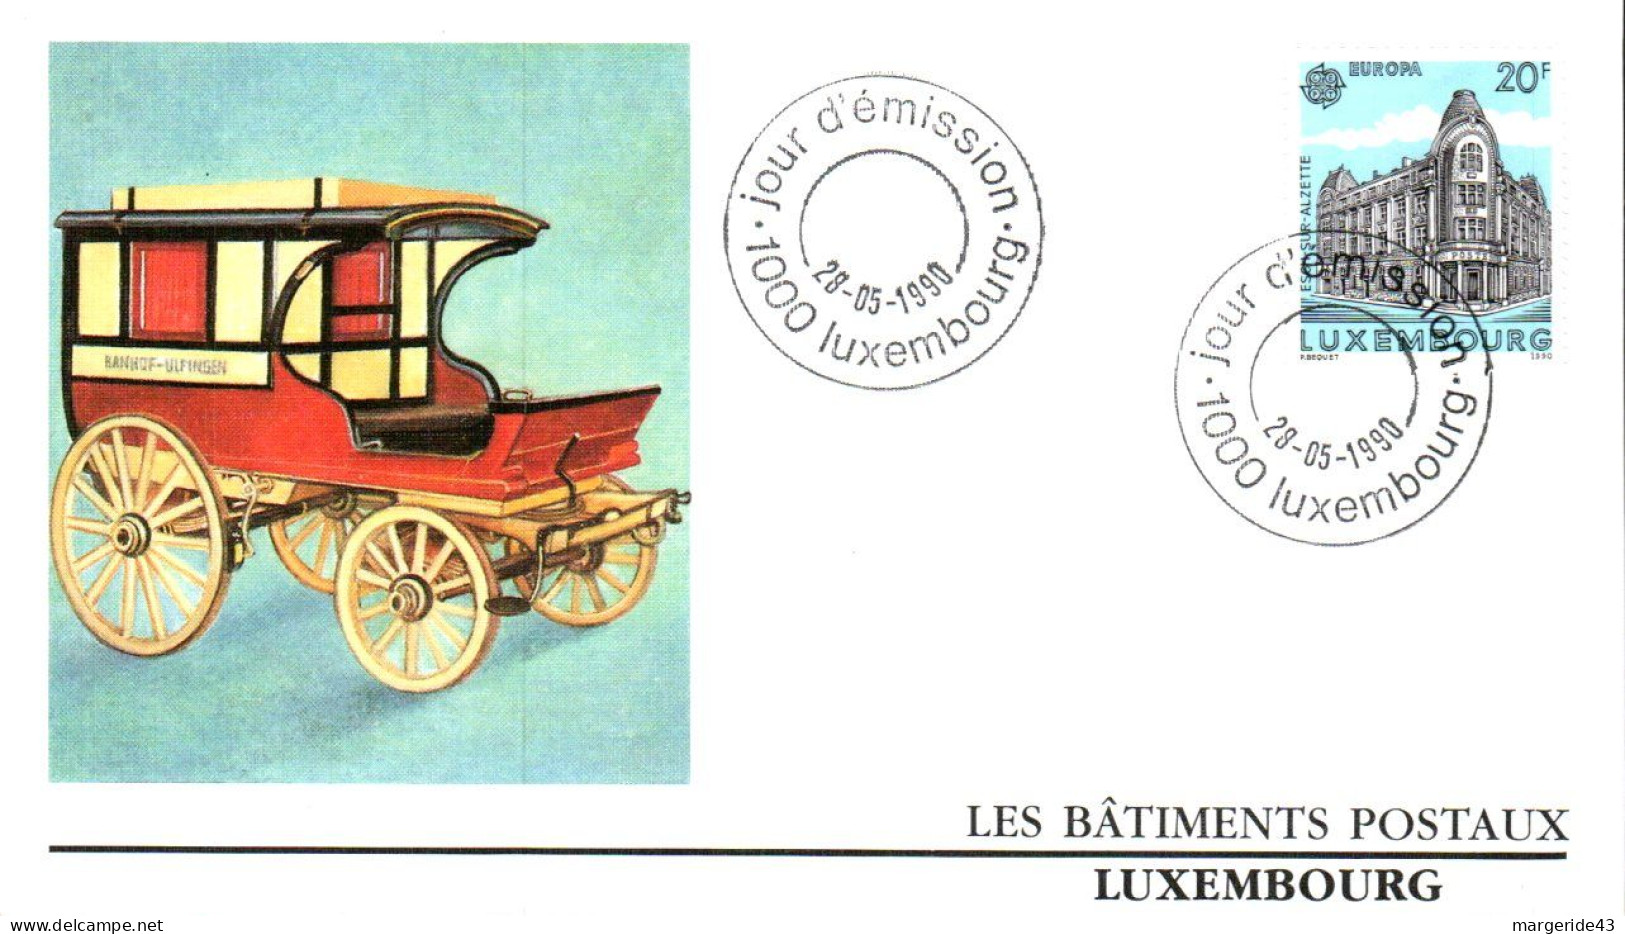 LUXEMBOURG FDC 1990 EUROPA - FDC